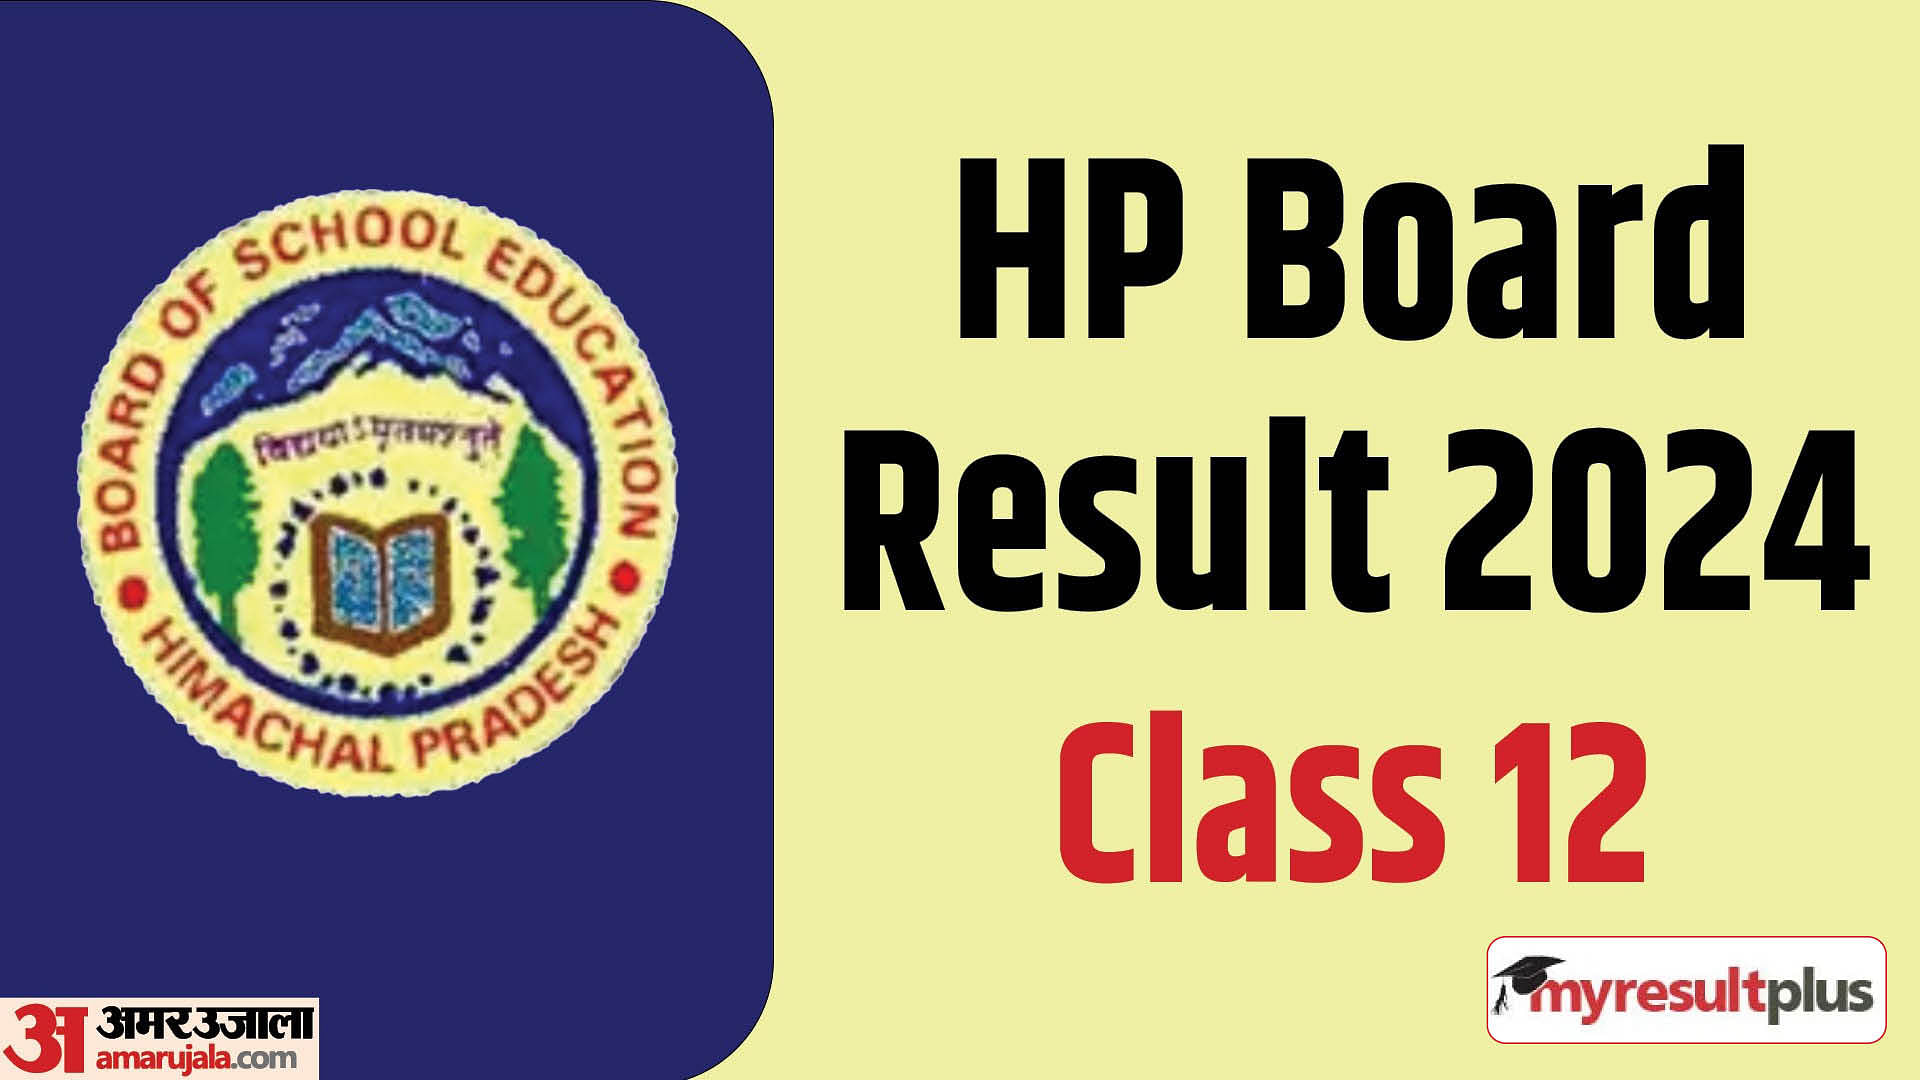 HP Board Result 2024: Check class 12 result on the official Amar Ujala website if HPBOSE website crashes